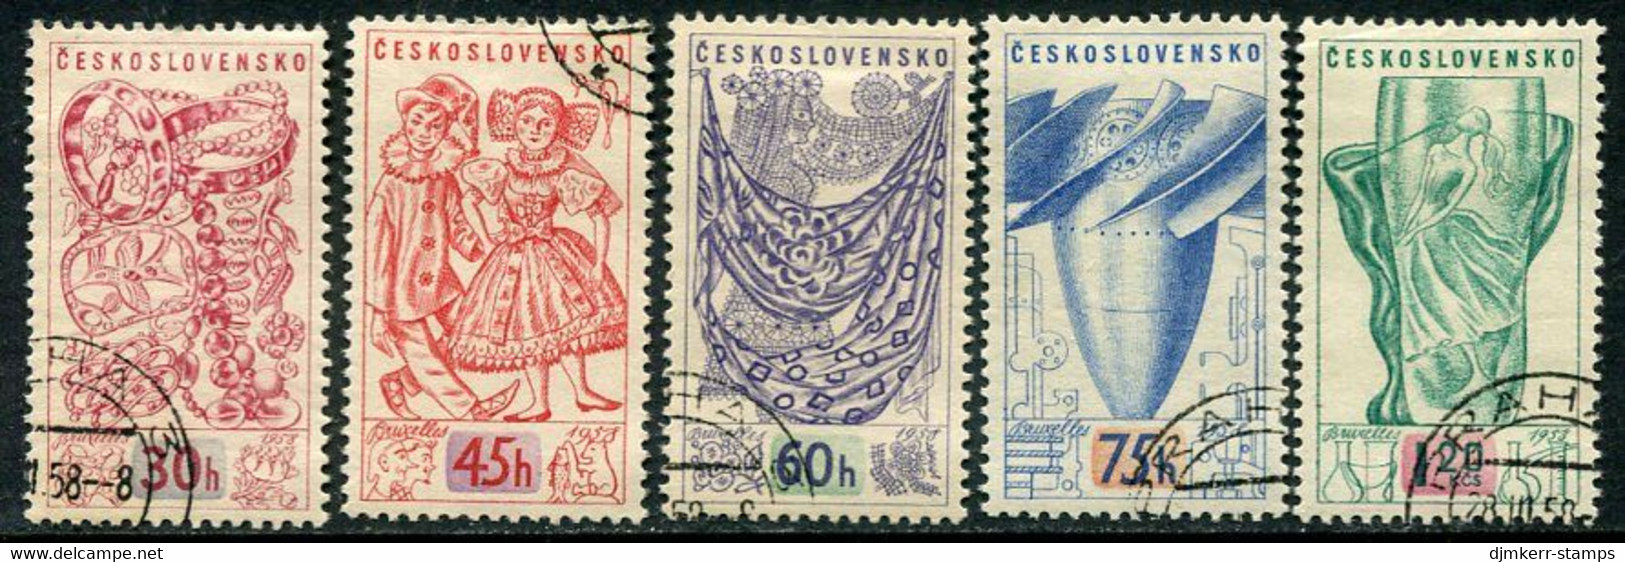 CZECHOSLOVAKIA 1958 World Expo, Brussels Used   Michel 1068-72 - Usados